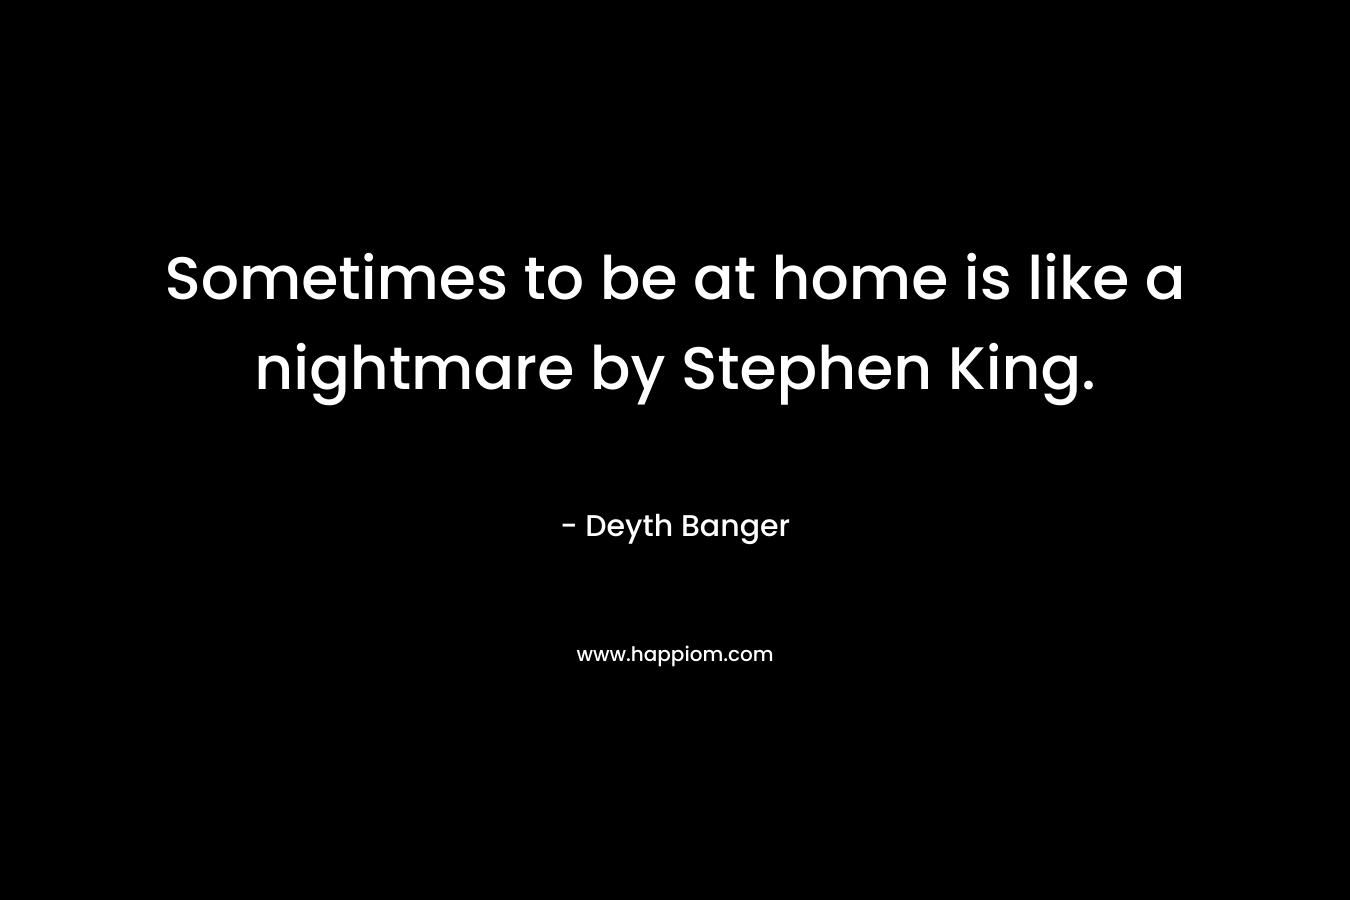 Sometimes to be at home is like a nightmare by Stephen King. – Deyth Banger